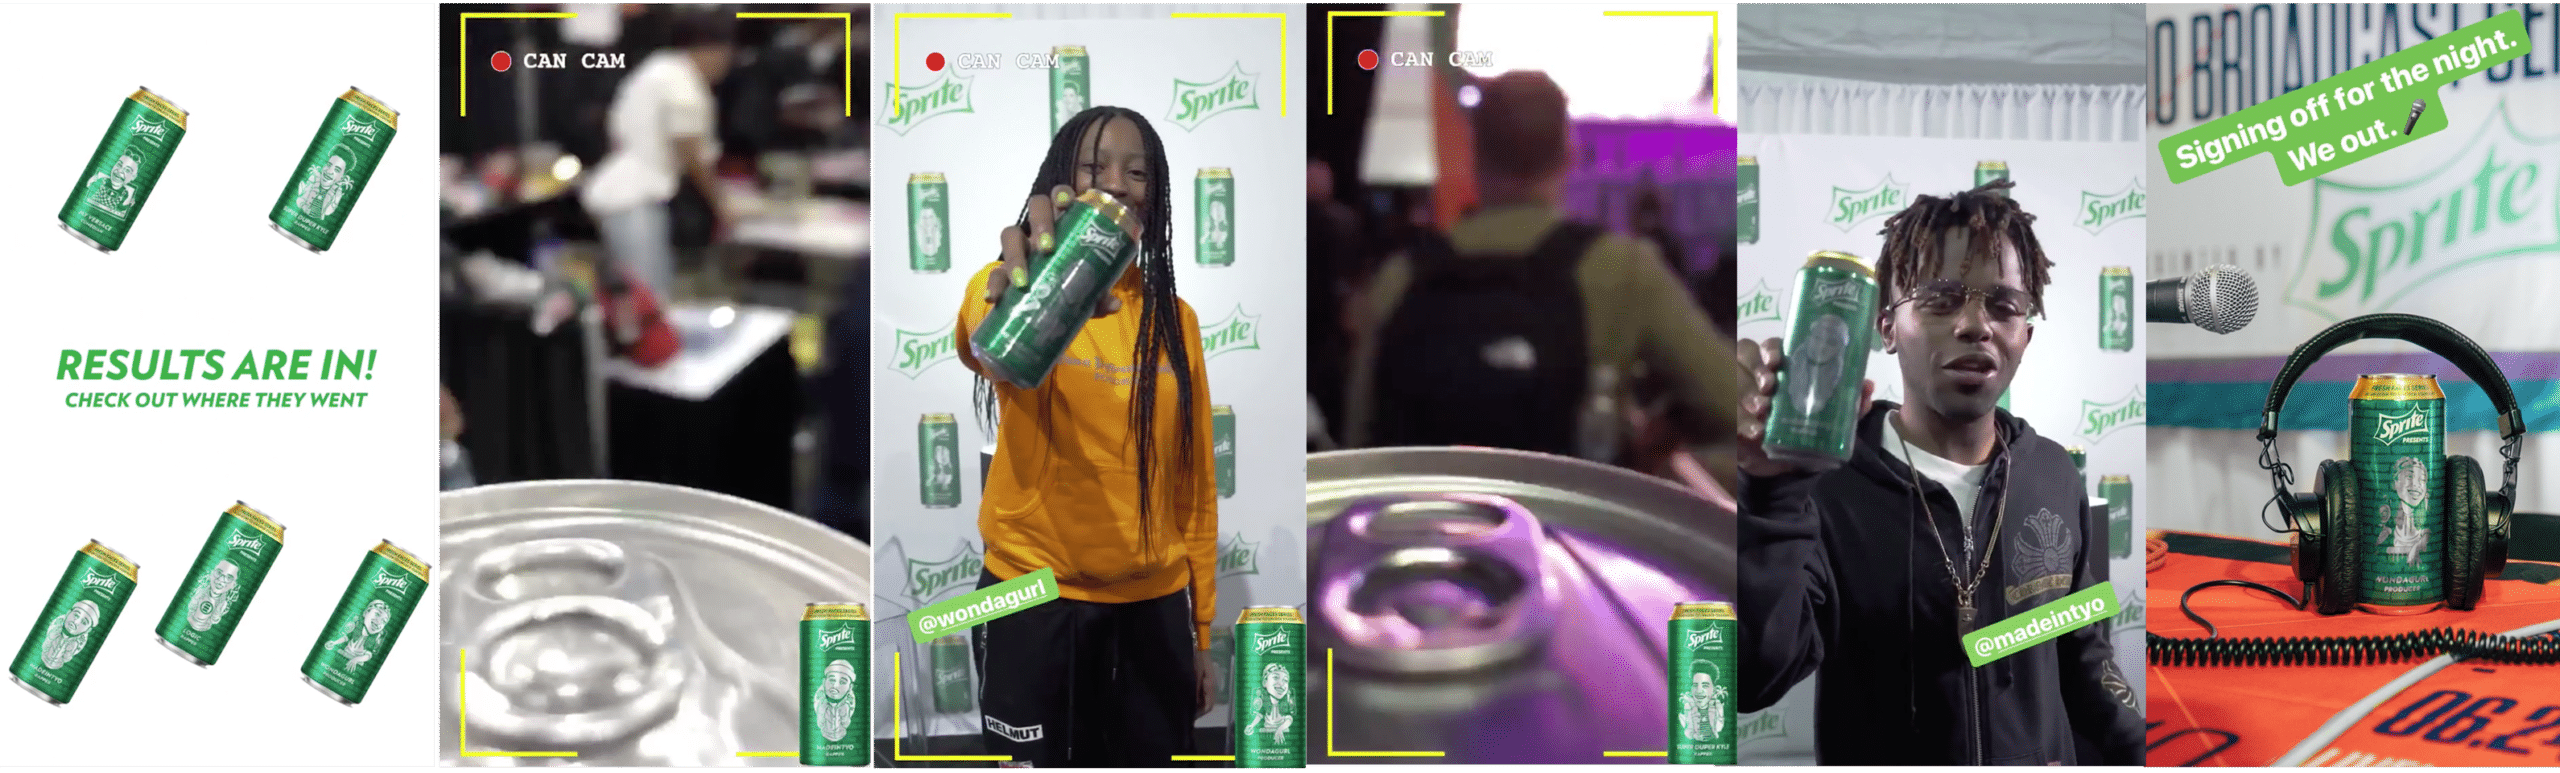 Compiled Instagram Stories Snapshots Of Sprite’s Can Cam Of The Celebrity Basketball Game